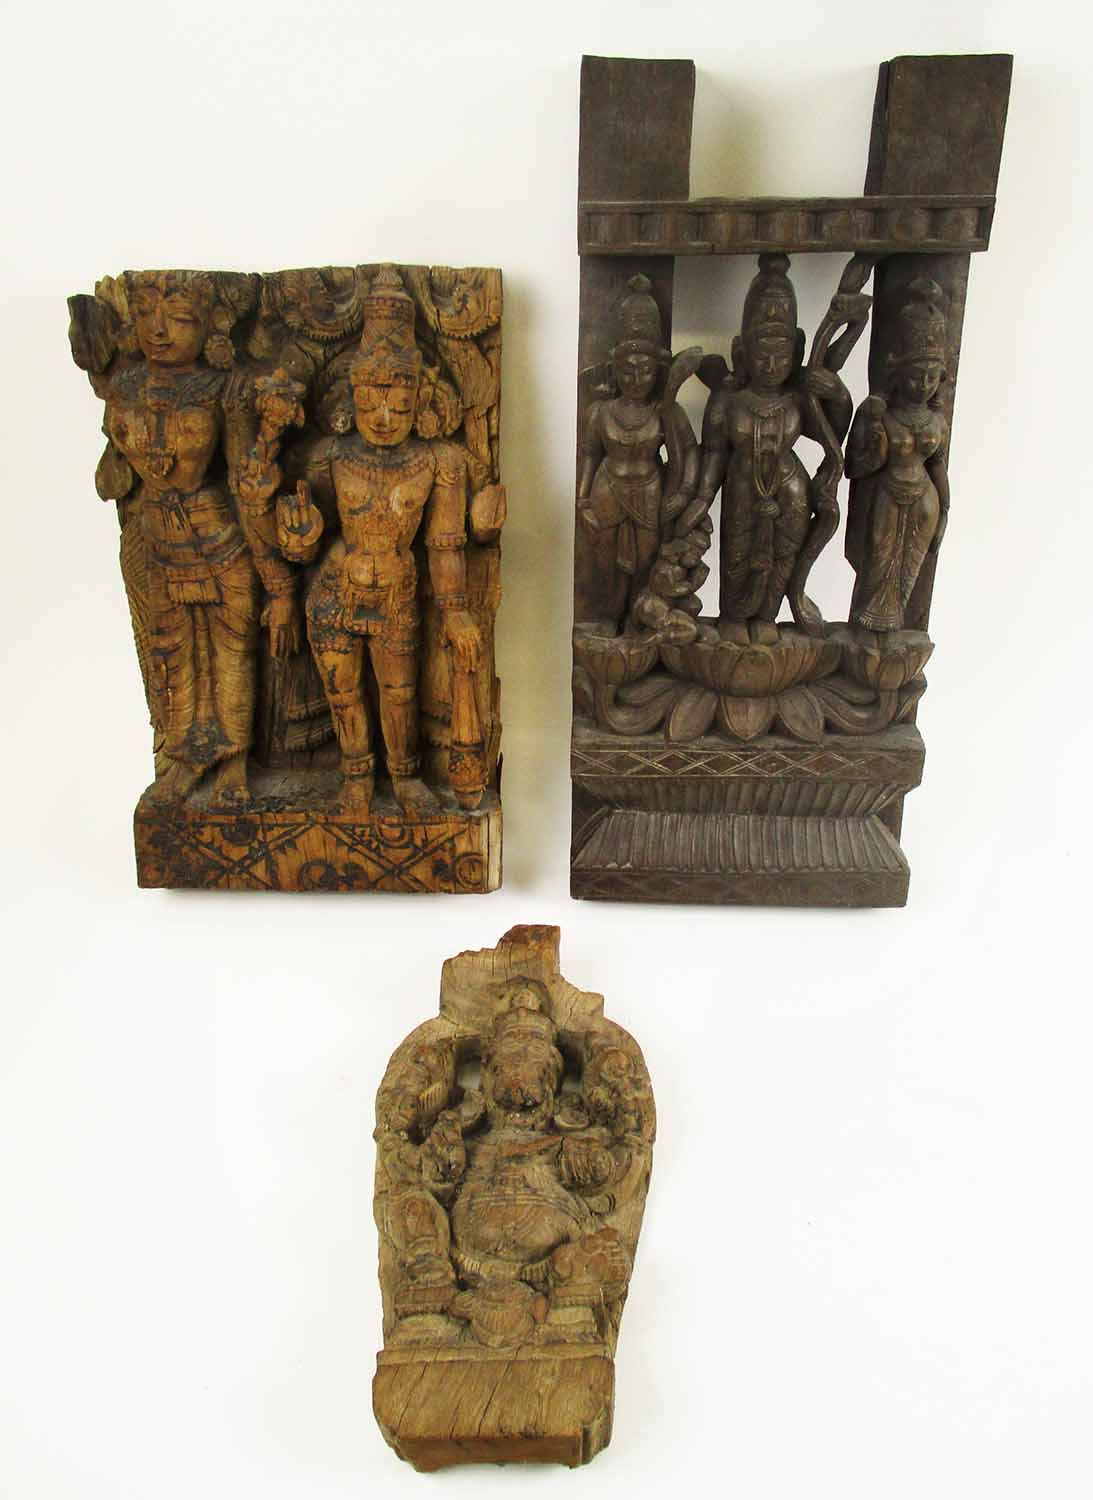 THREE INDIAN WOOD CARVINGS, 19th century and later, Mysore, variously depicting Ganesh,